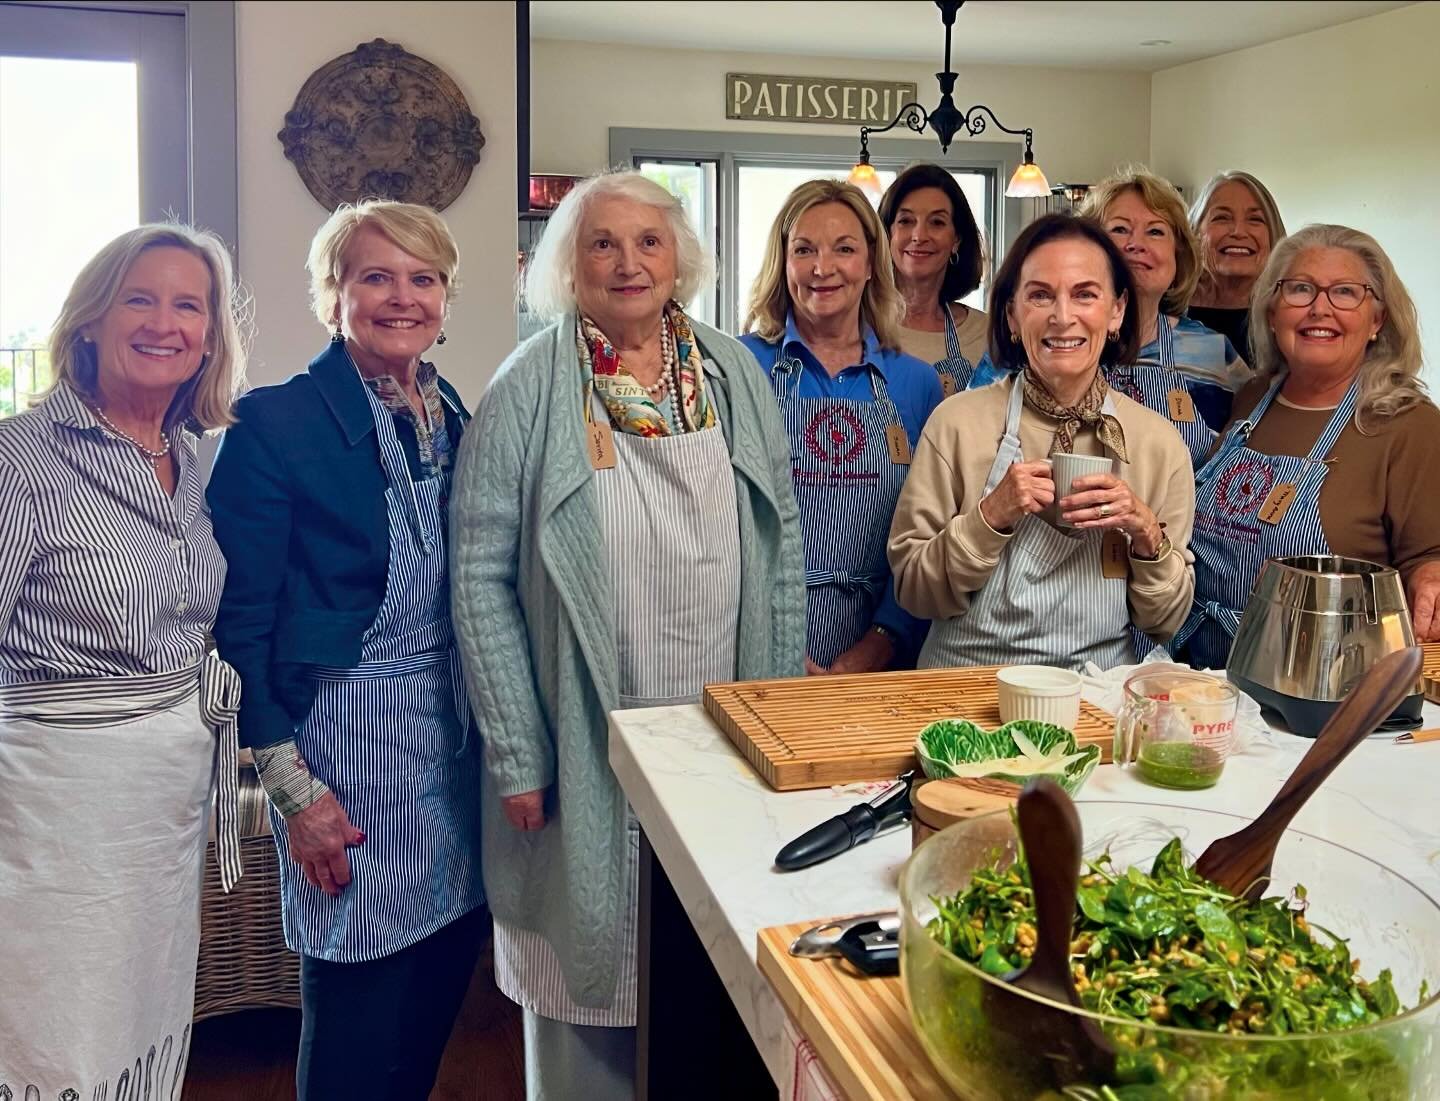 Another fun #cookingclass at #domainedemanion with #spring #celebration #menu #recipes highlighted from #deborahmadison #joseandres #inagarten #bleuboheme and #valerierice  #seasonalflavors #cookingwithlove